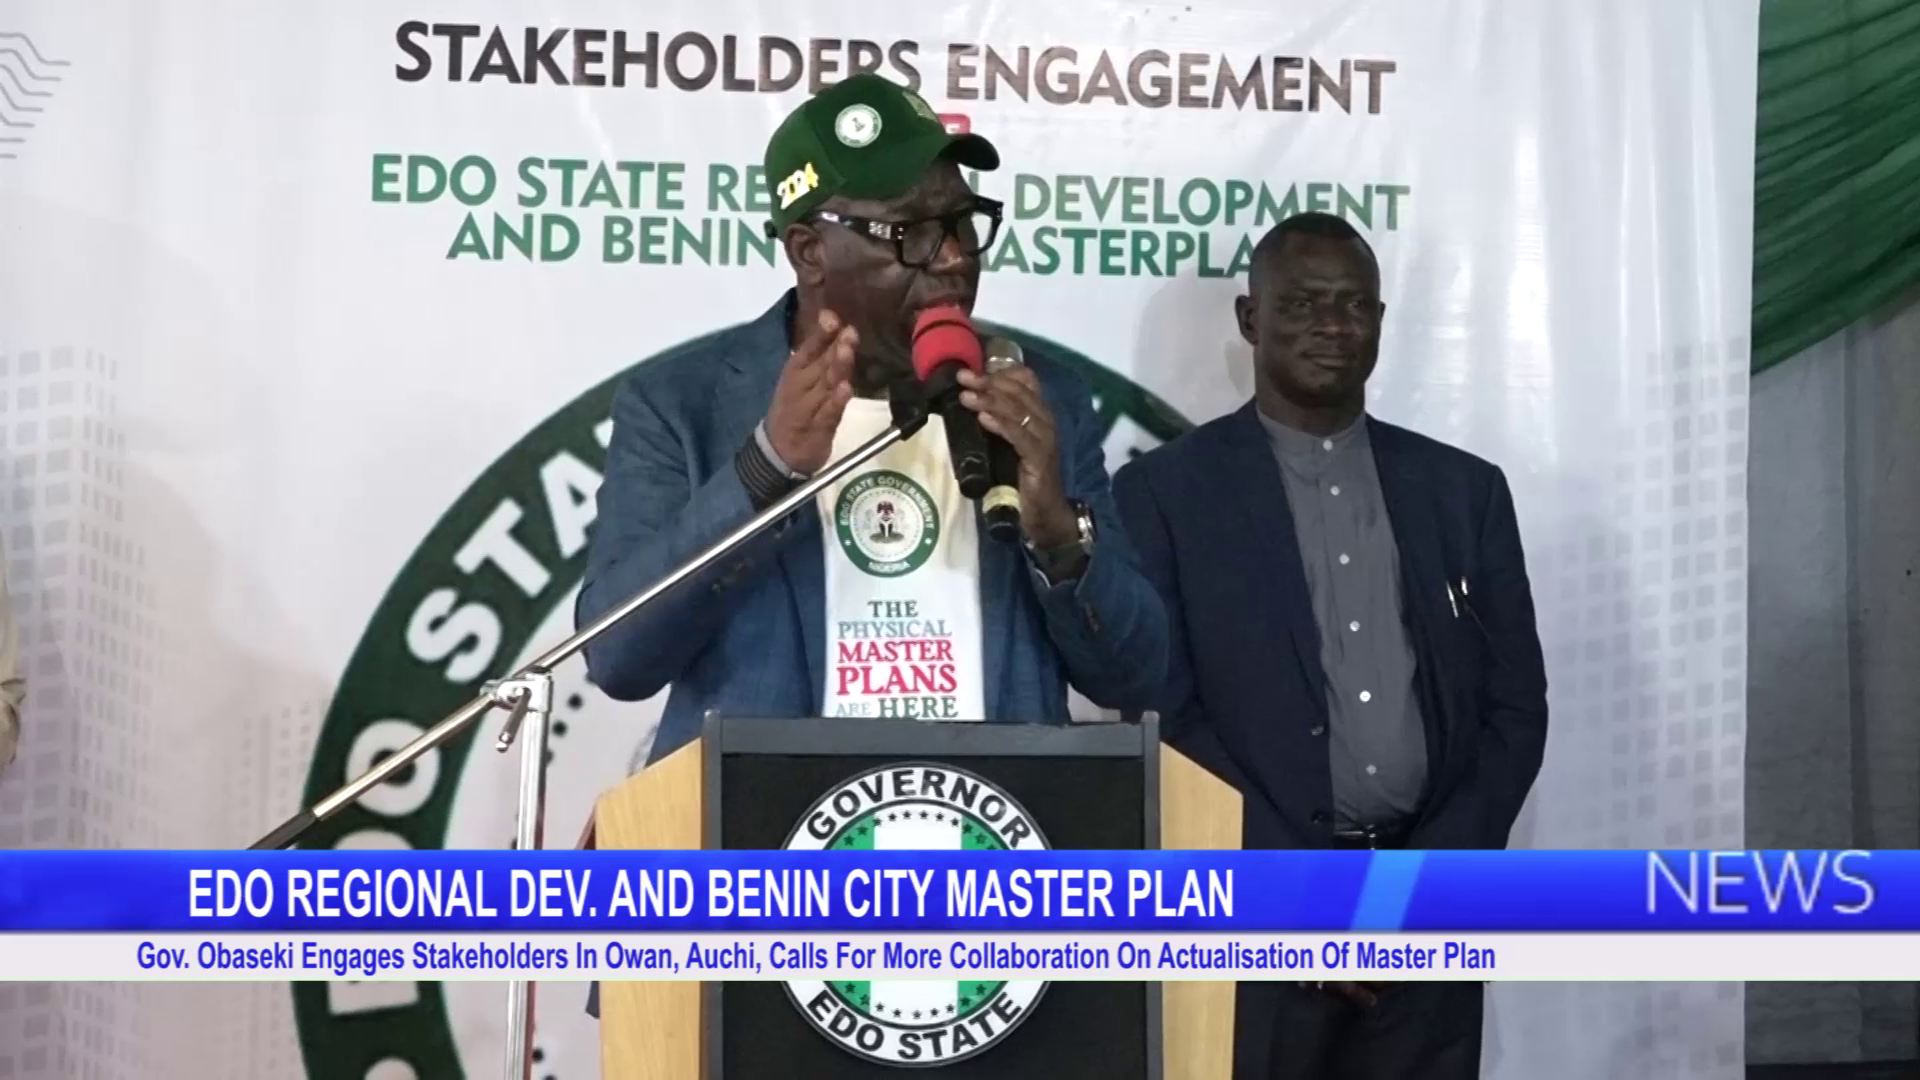 Gov. Obaseki Engages Stakeholders In Owan, Auchi, Calls For More Collaboration On Actualisation Of Master Plan